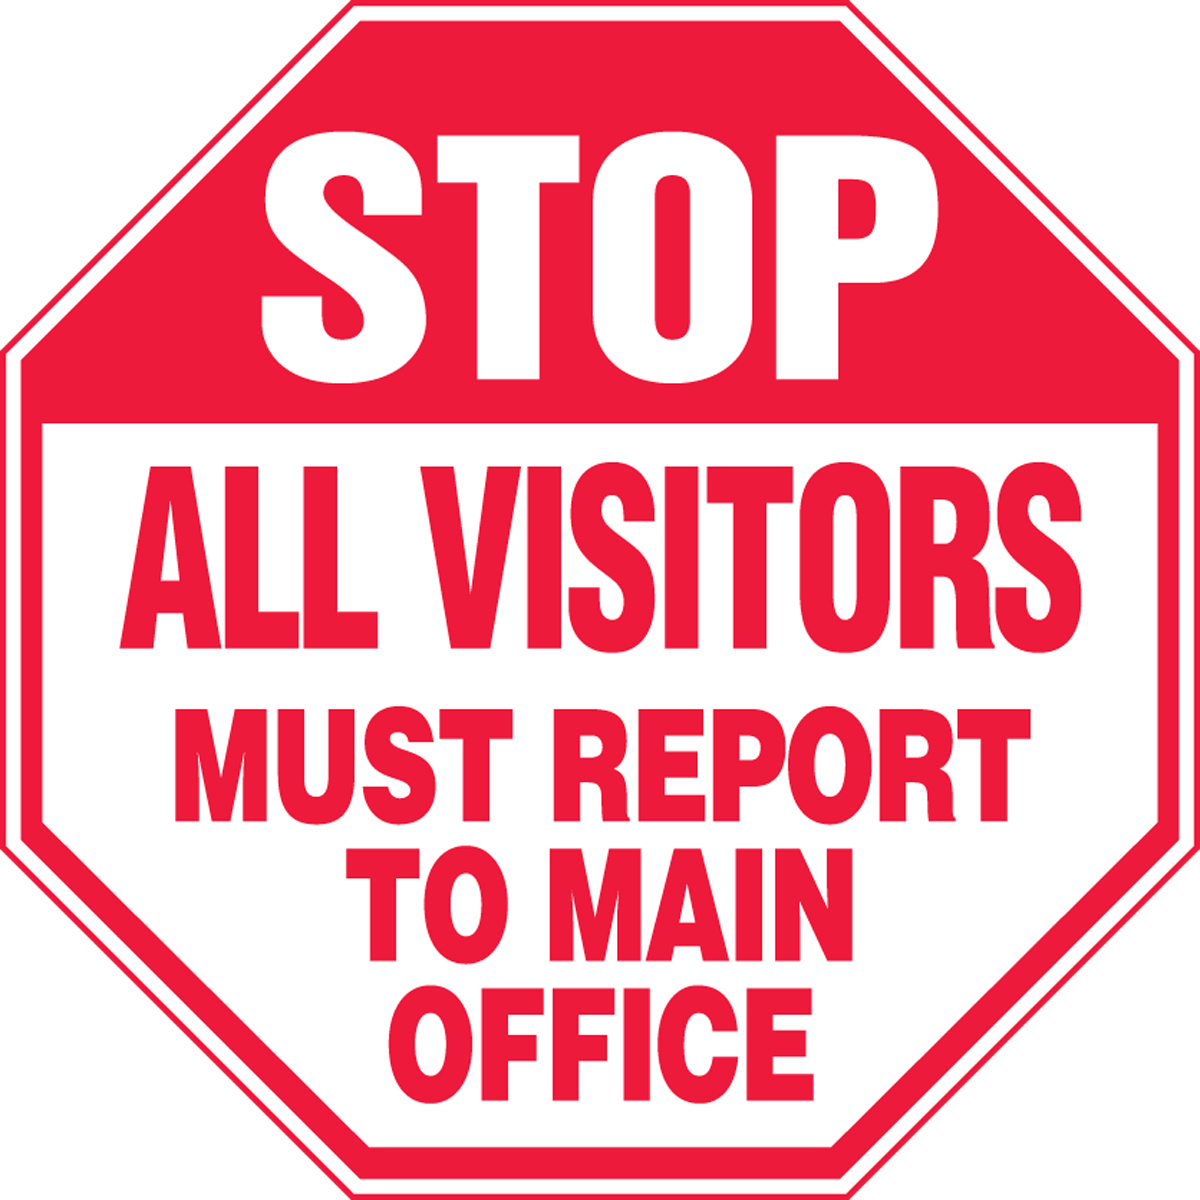 All Visitors Must Report To Main Office